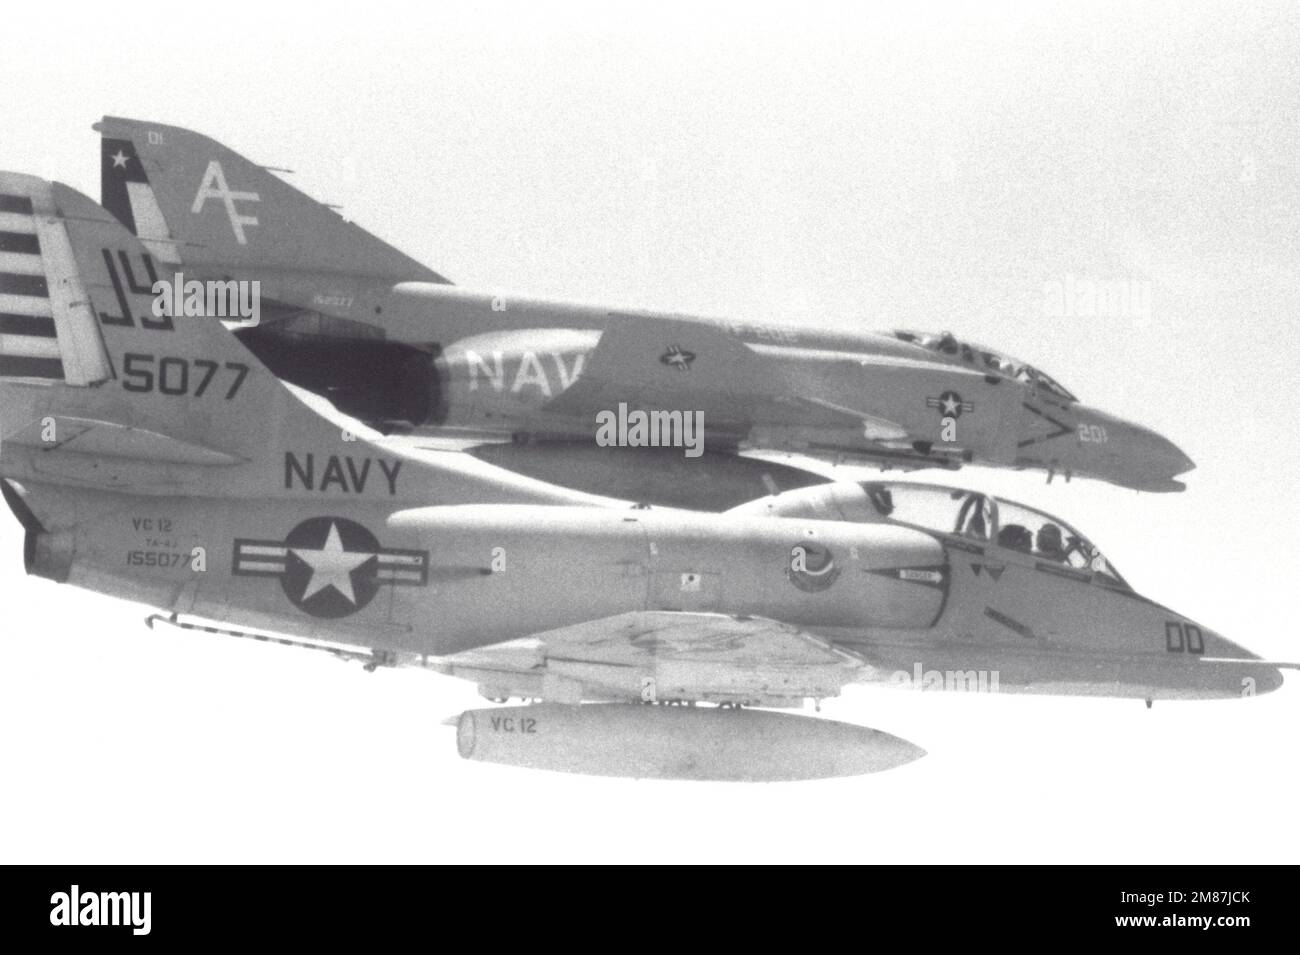 An air-to-air right side view of a Fleet Composite Squadron 12 (VC-12) TA-4J Skyhawk aircraft and a Fighter Squadron 202 (VF-202) F-4 Phantom II aircraft in formation. Country: Unknown Stock Photo